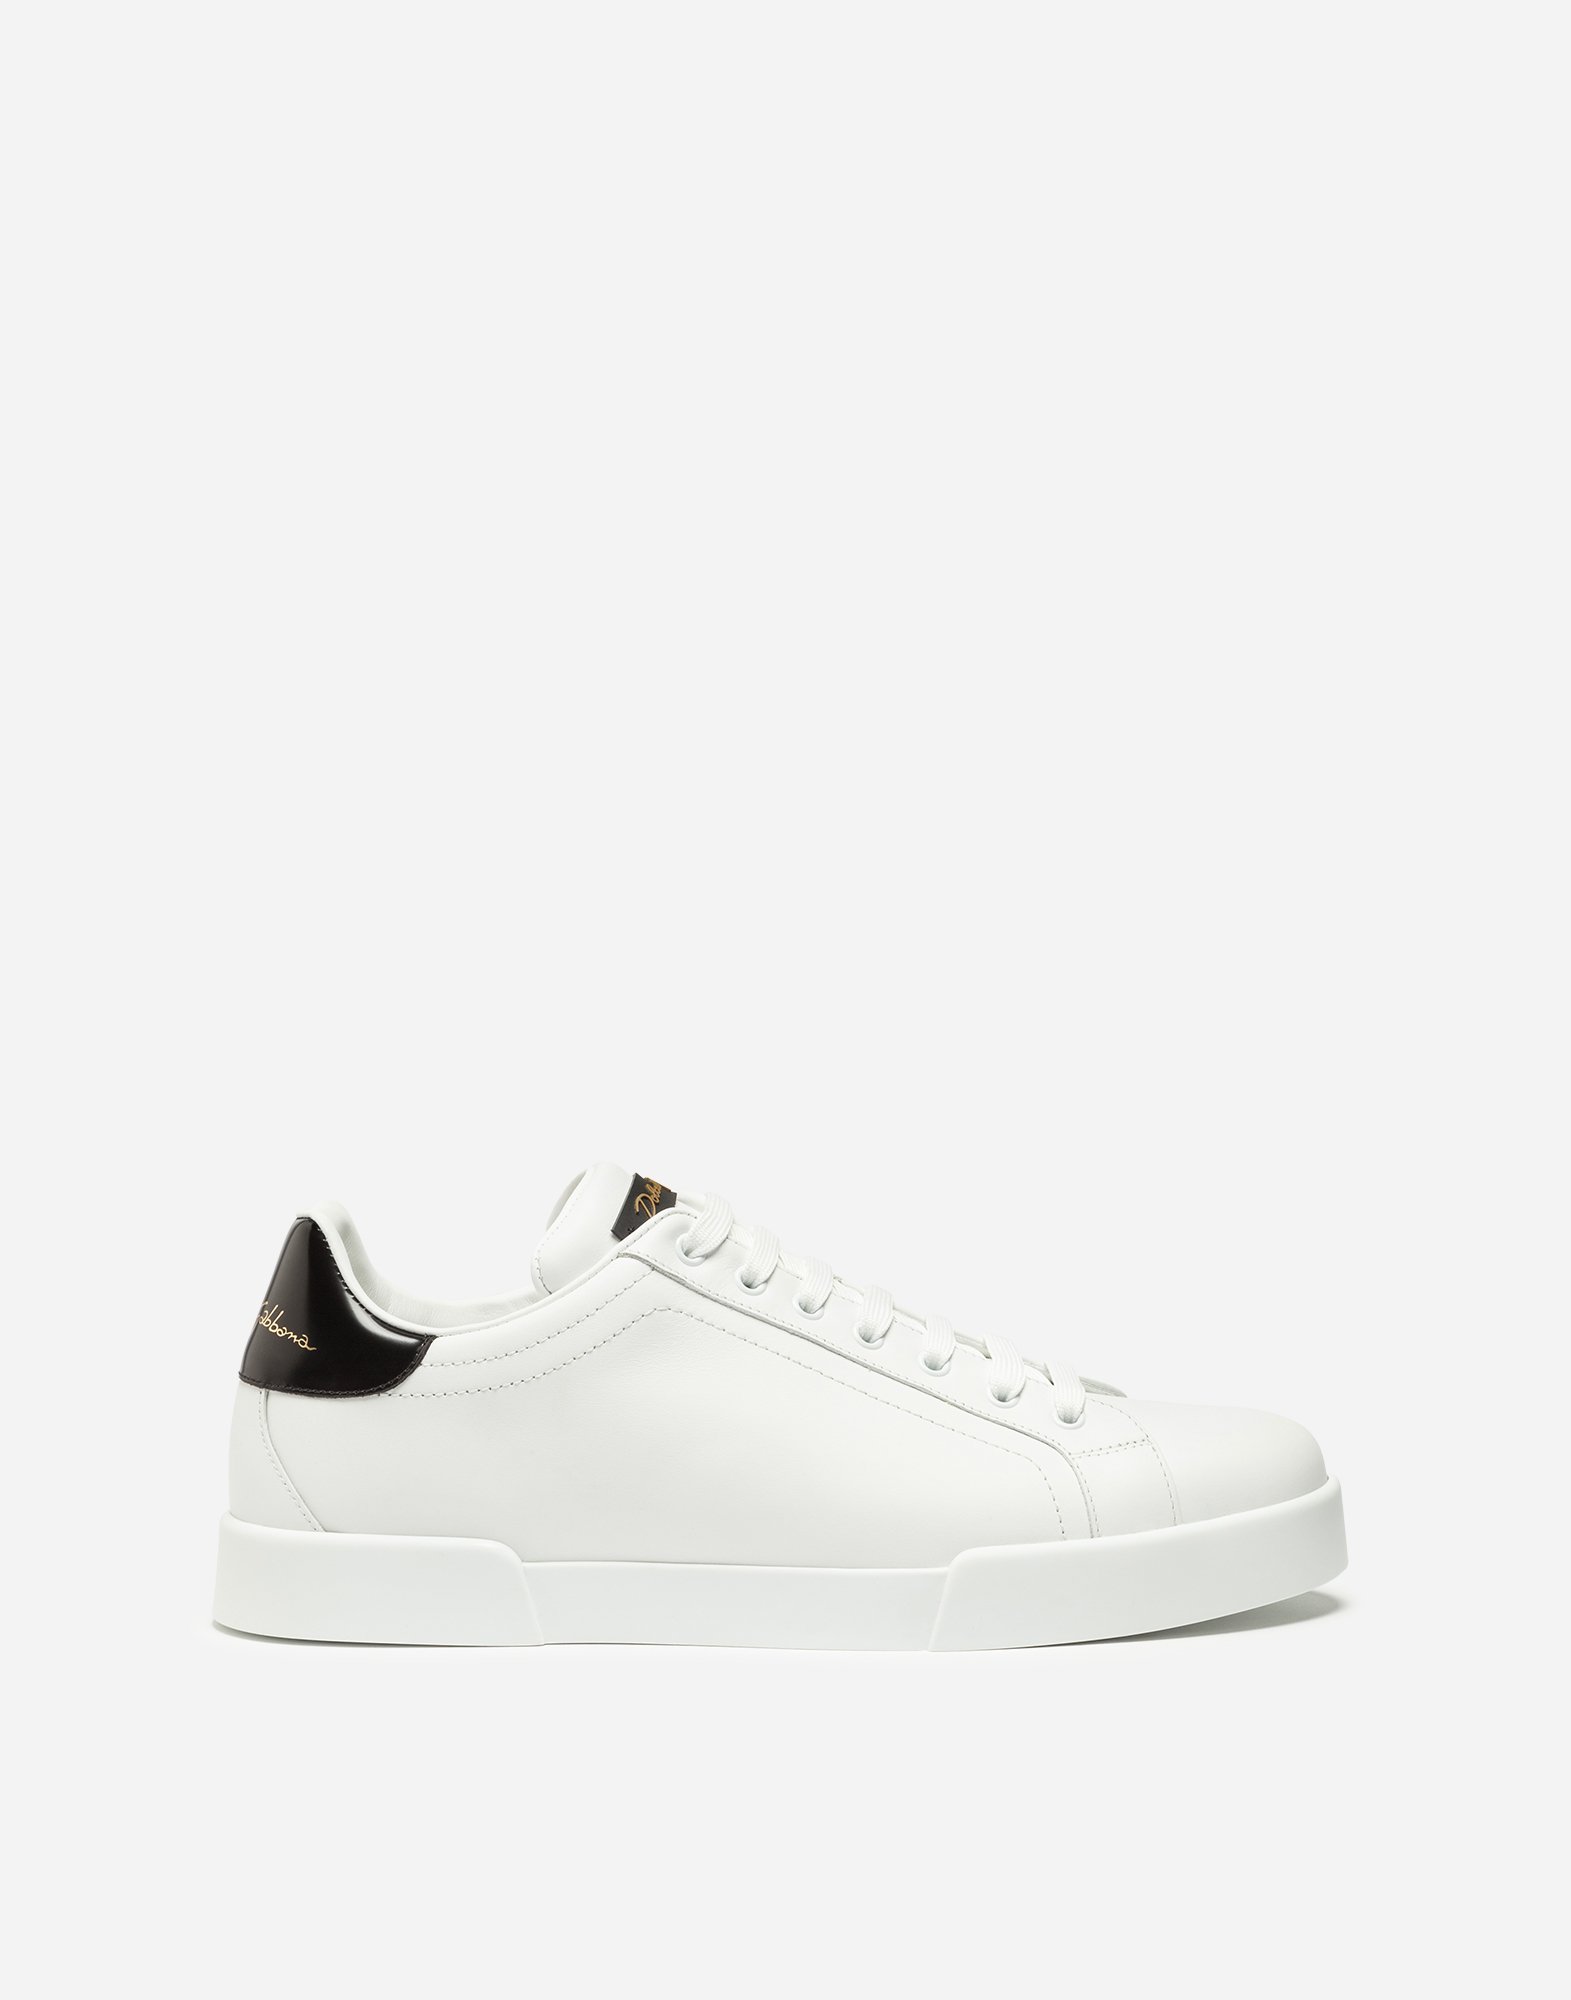 dolce gabbana mens shoes sneakers